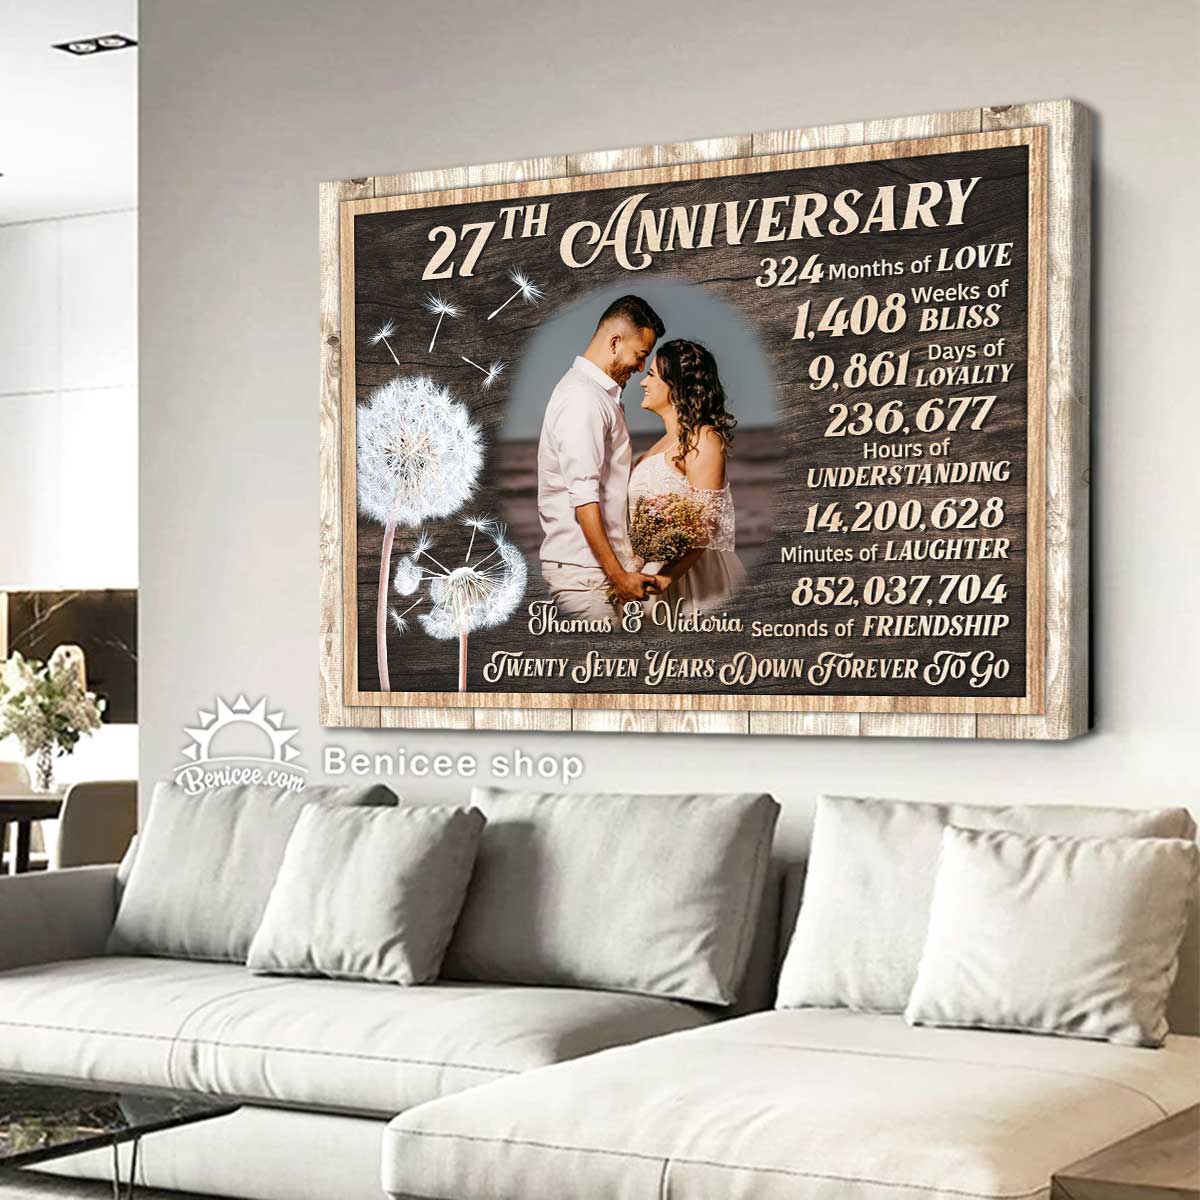 27 Extraordinary 1 Year Anniversary Gifts for Him